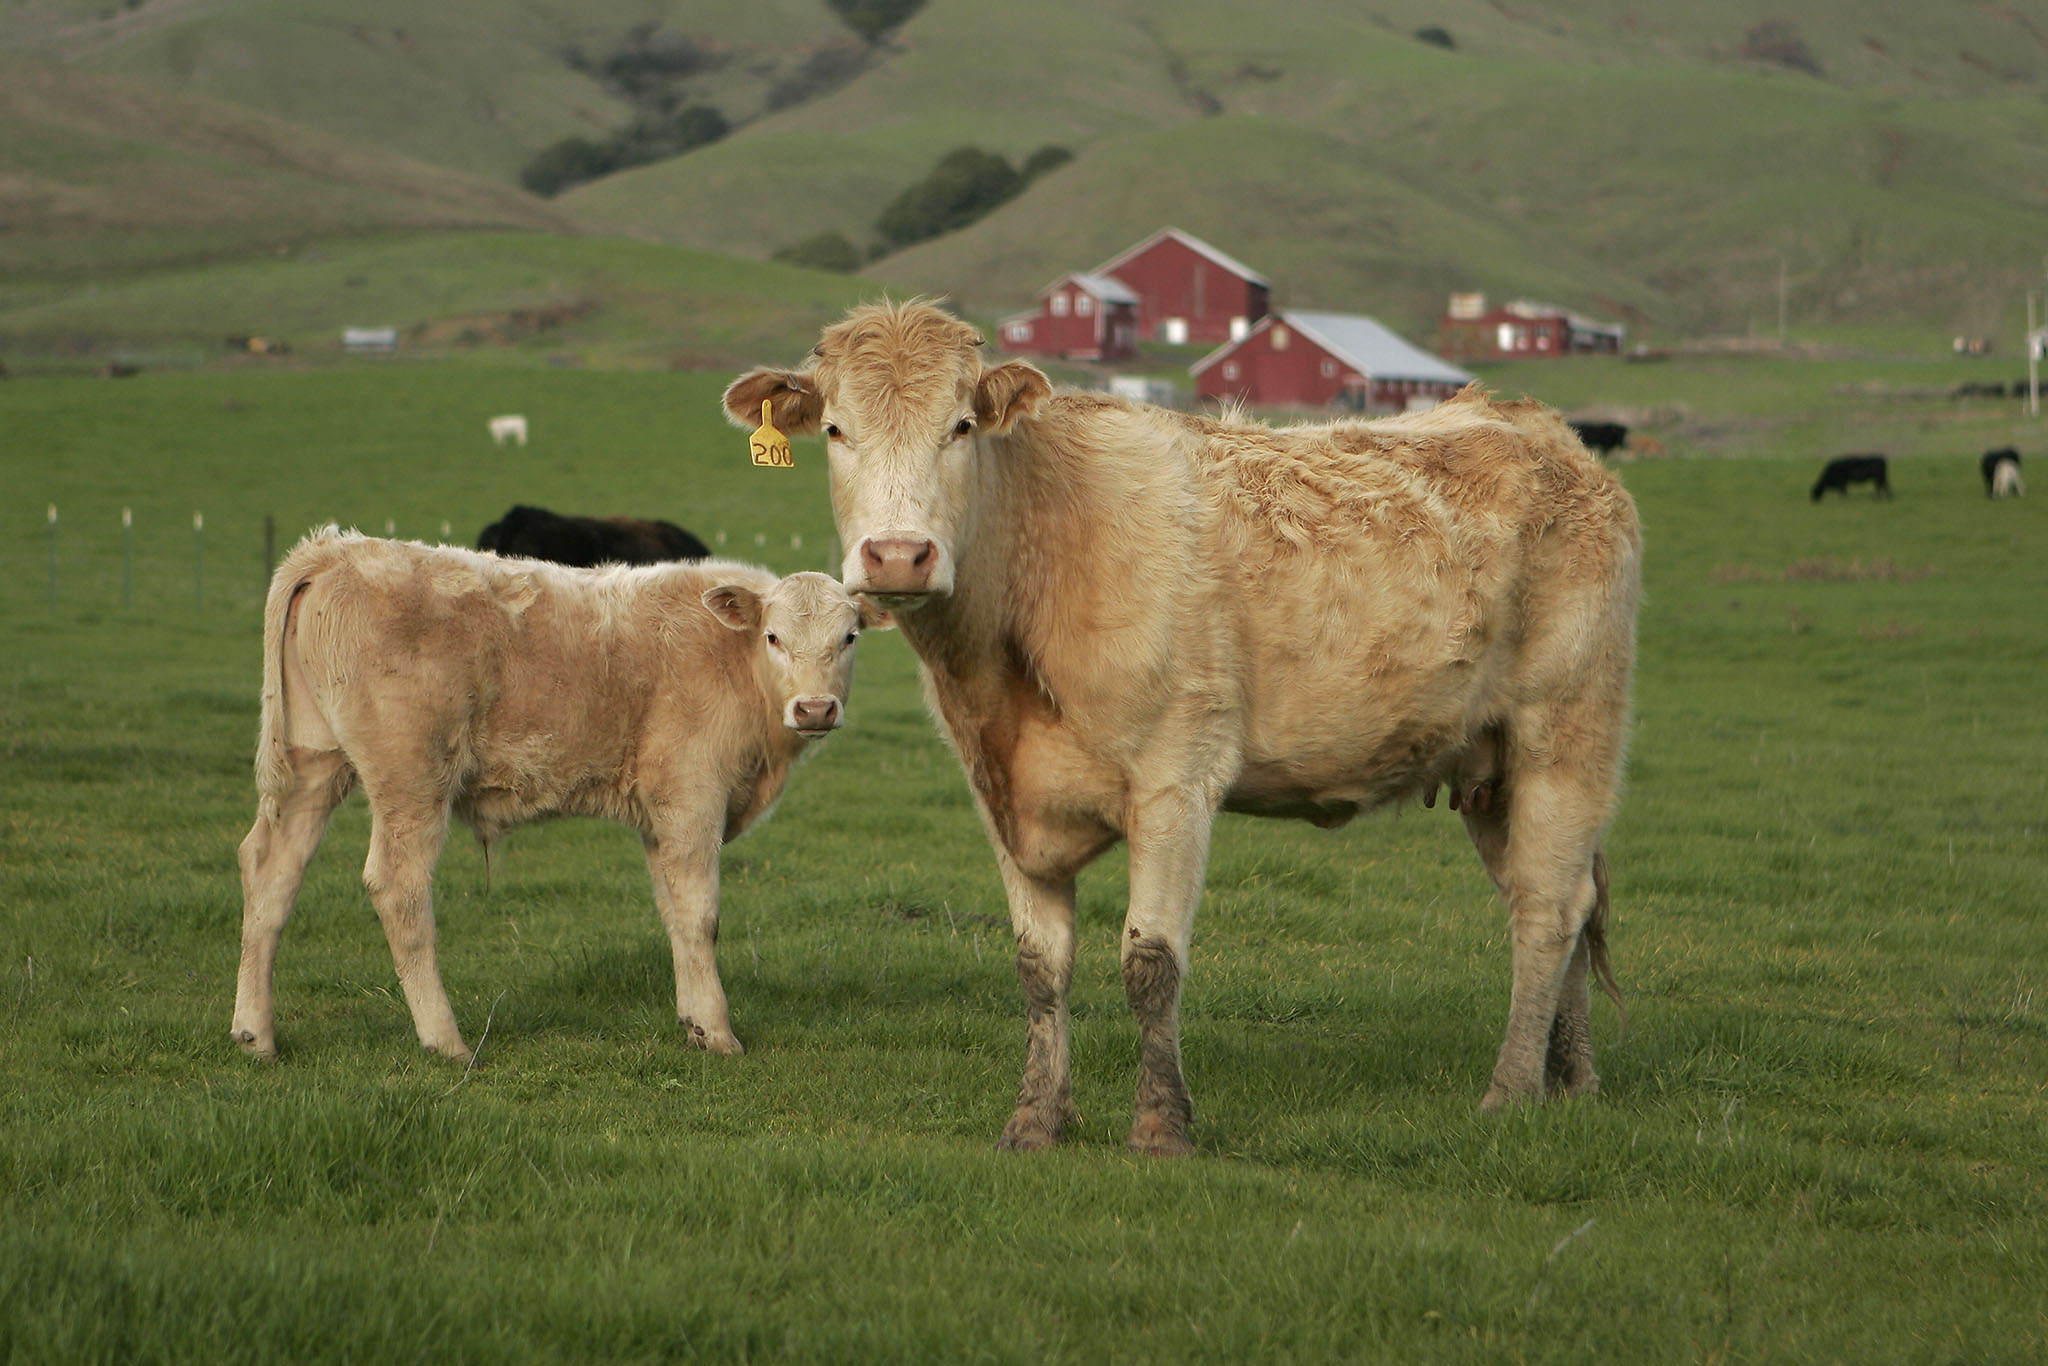 A cow and her calf stand in the foreground with a red barn and lush, green hills rising in the background.